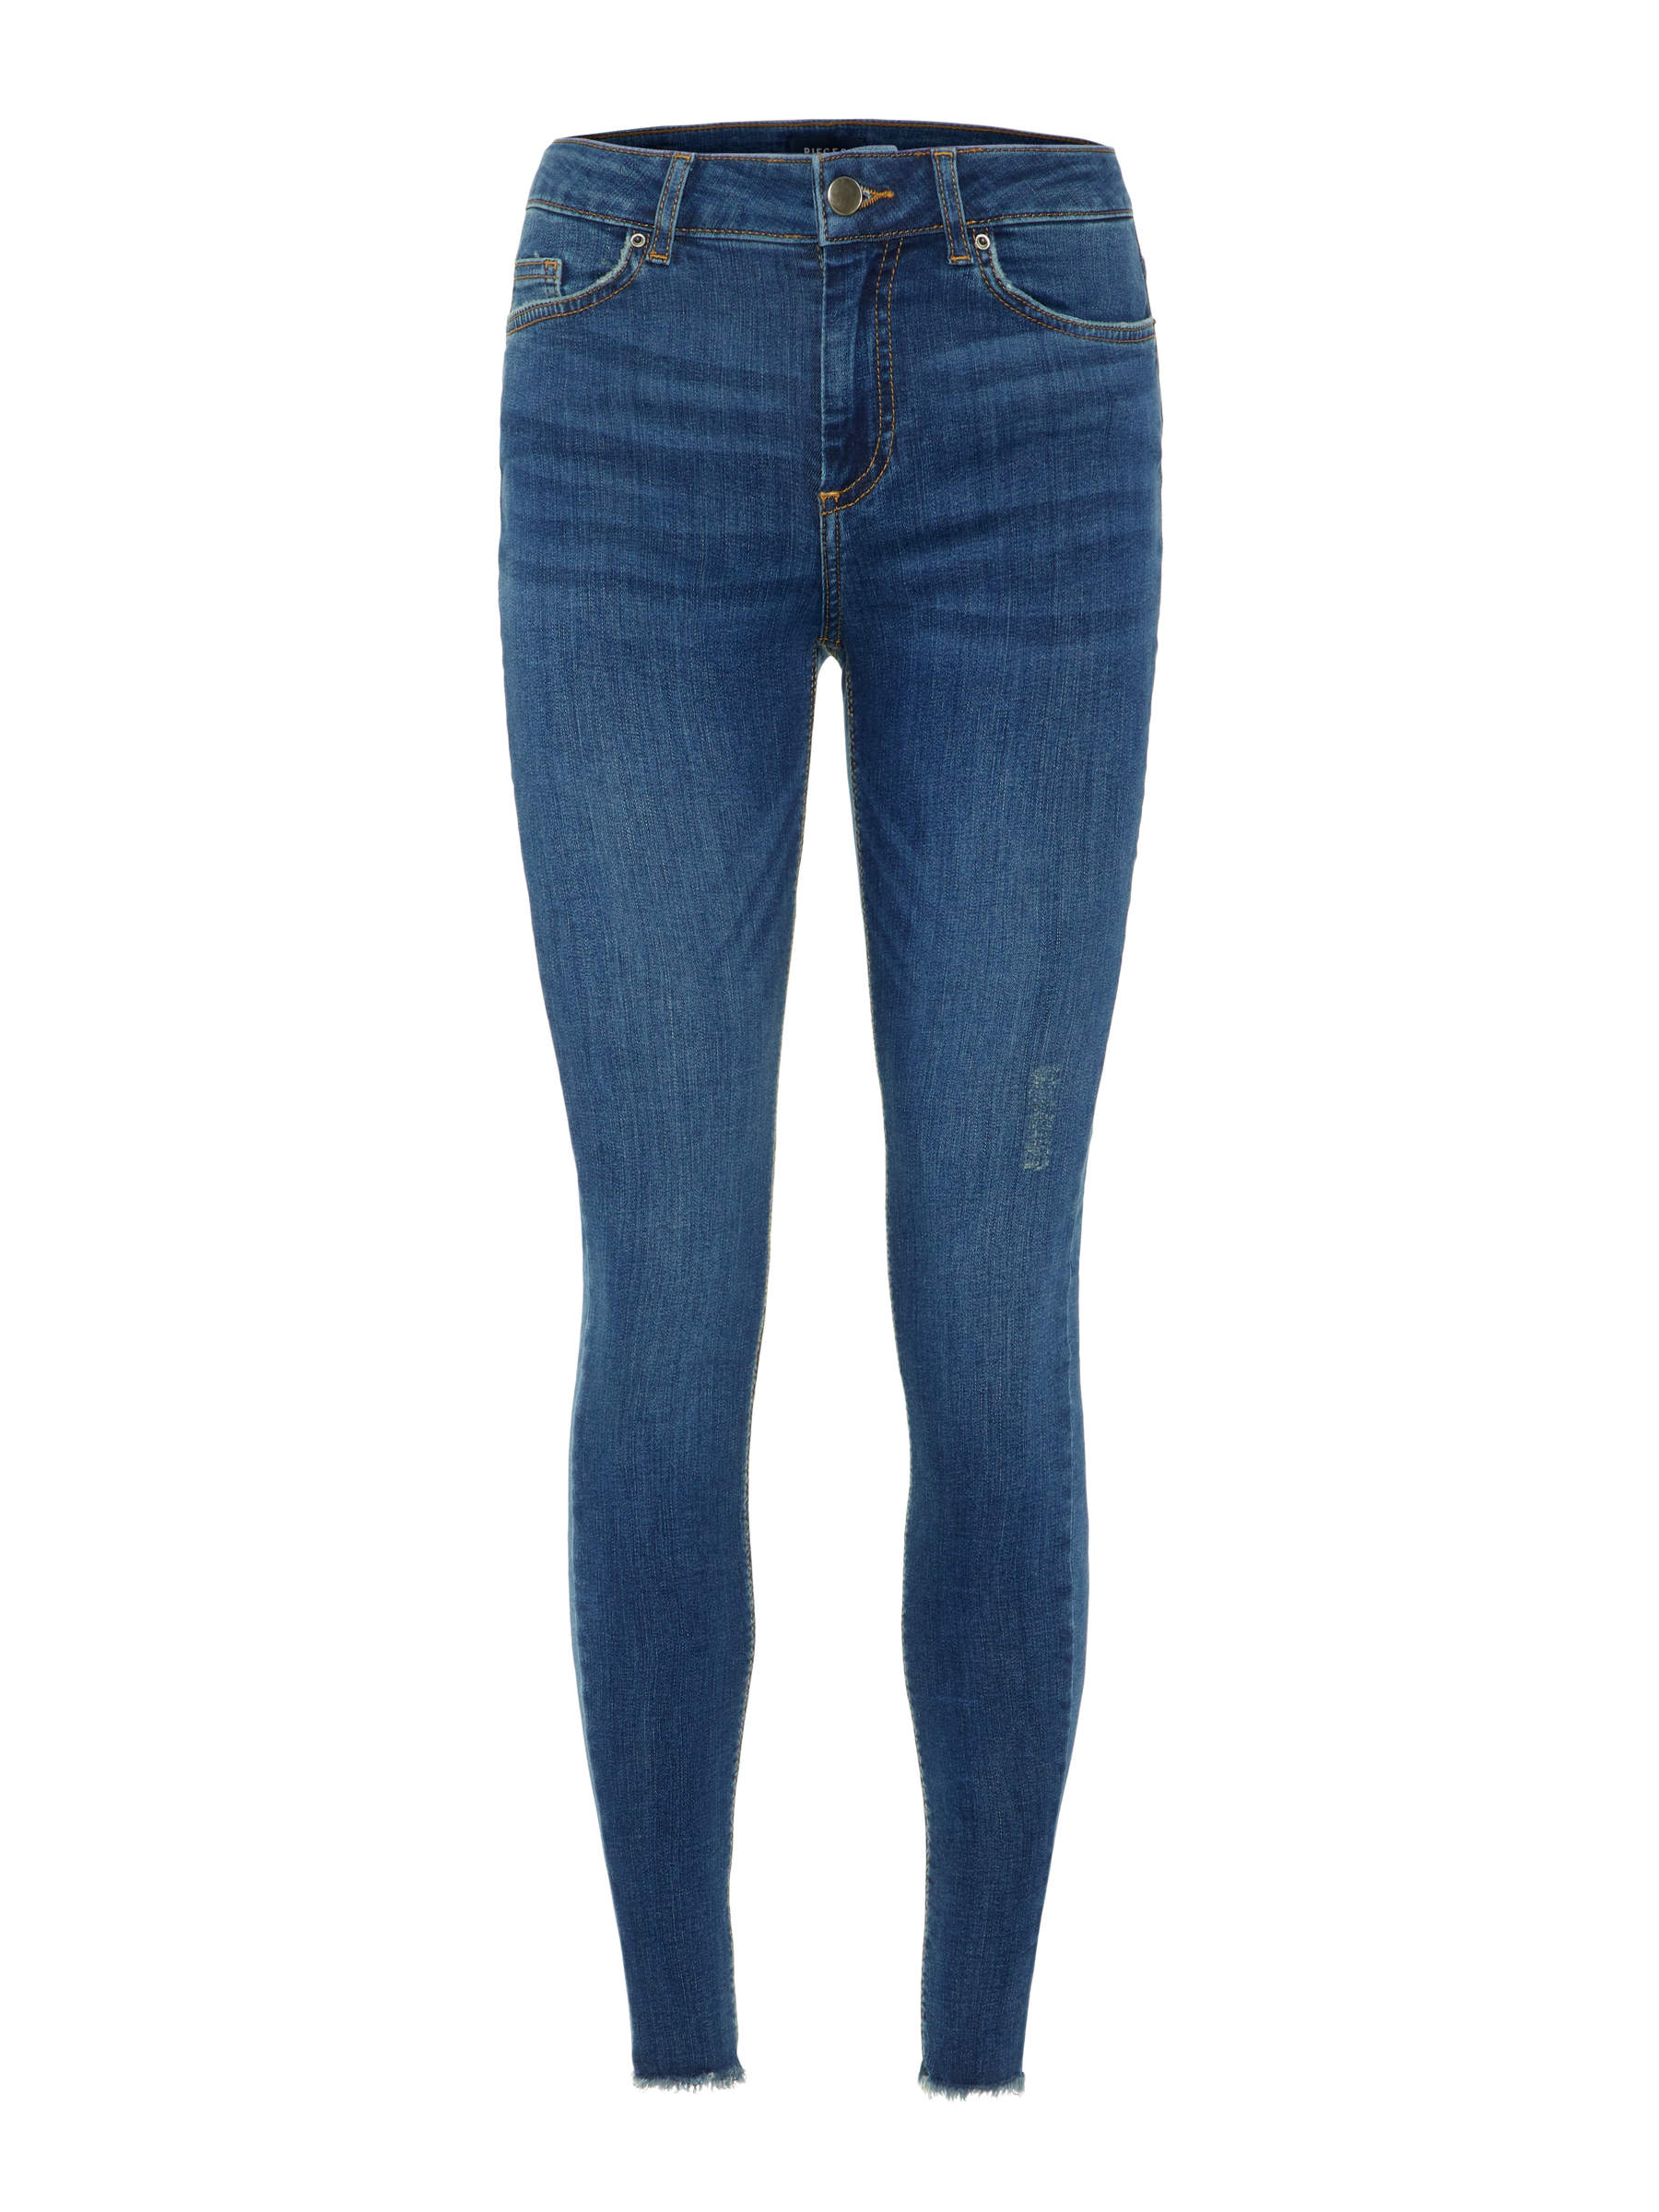 Mid waist skinny fit jeans | Pieces